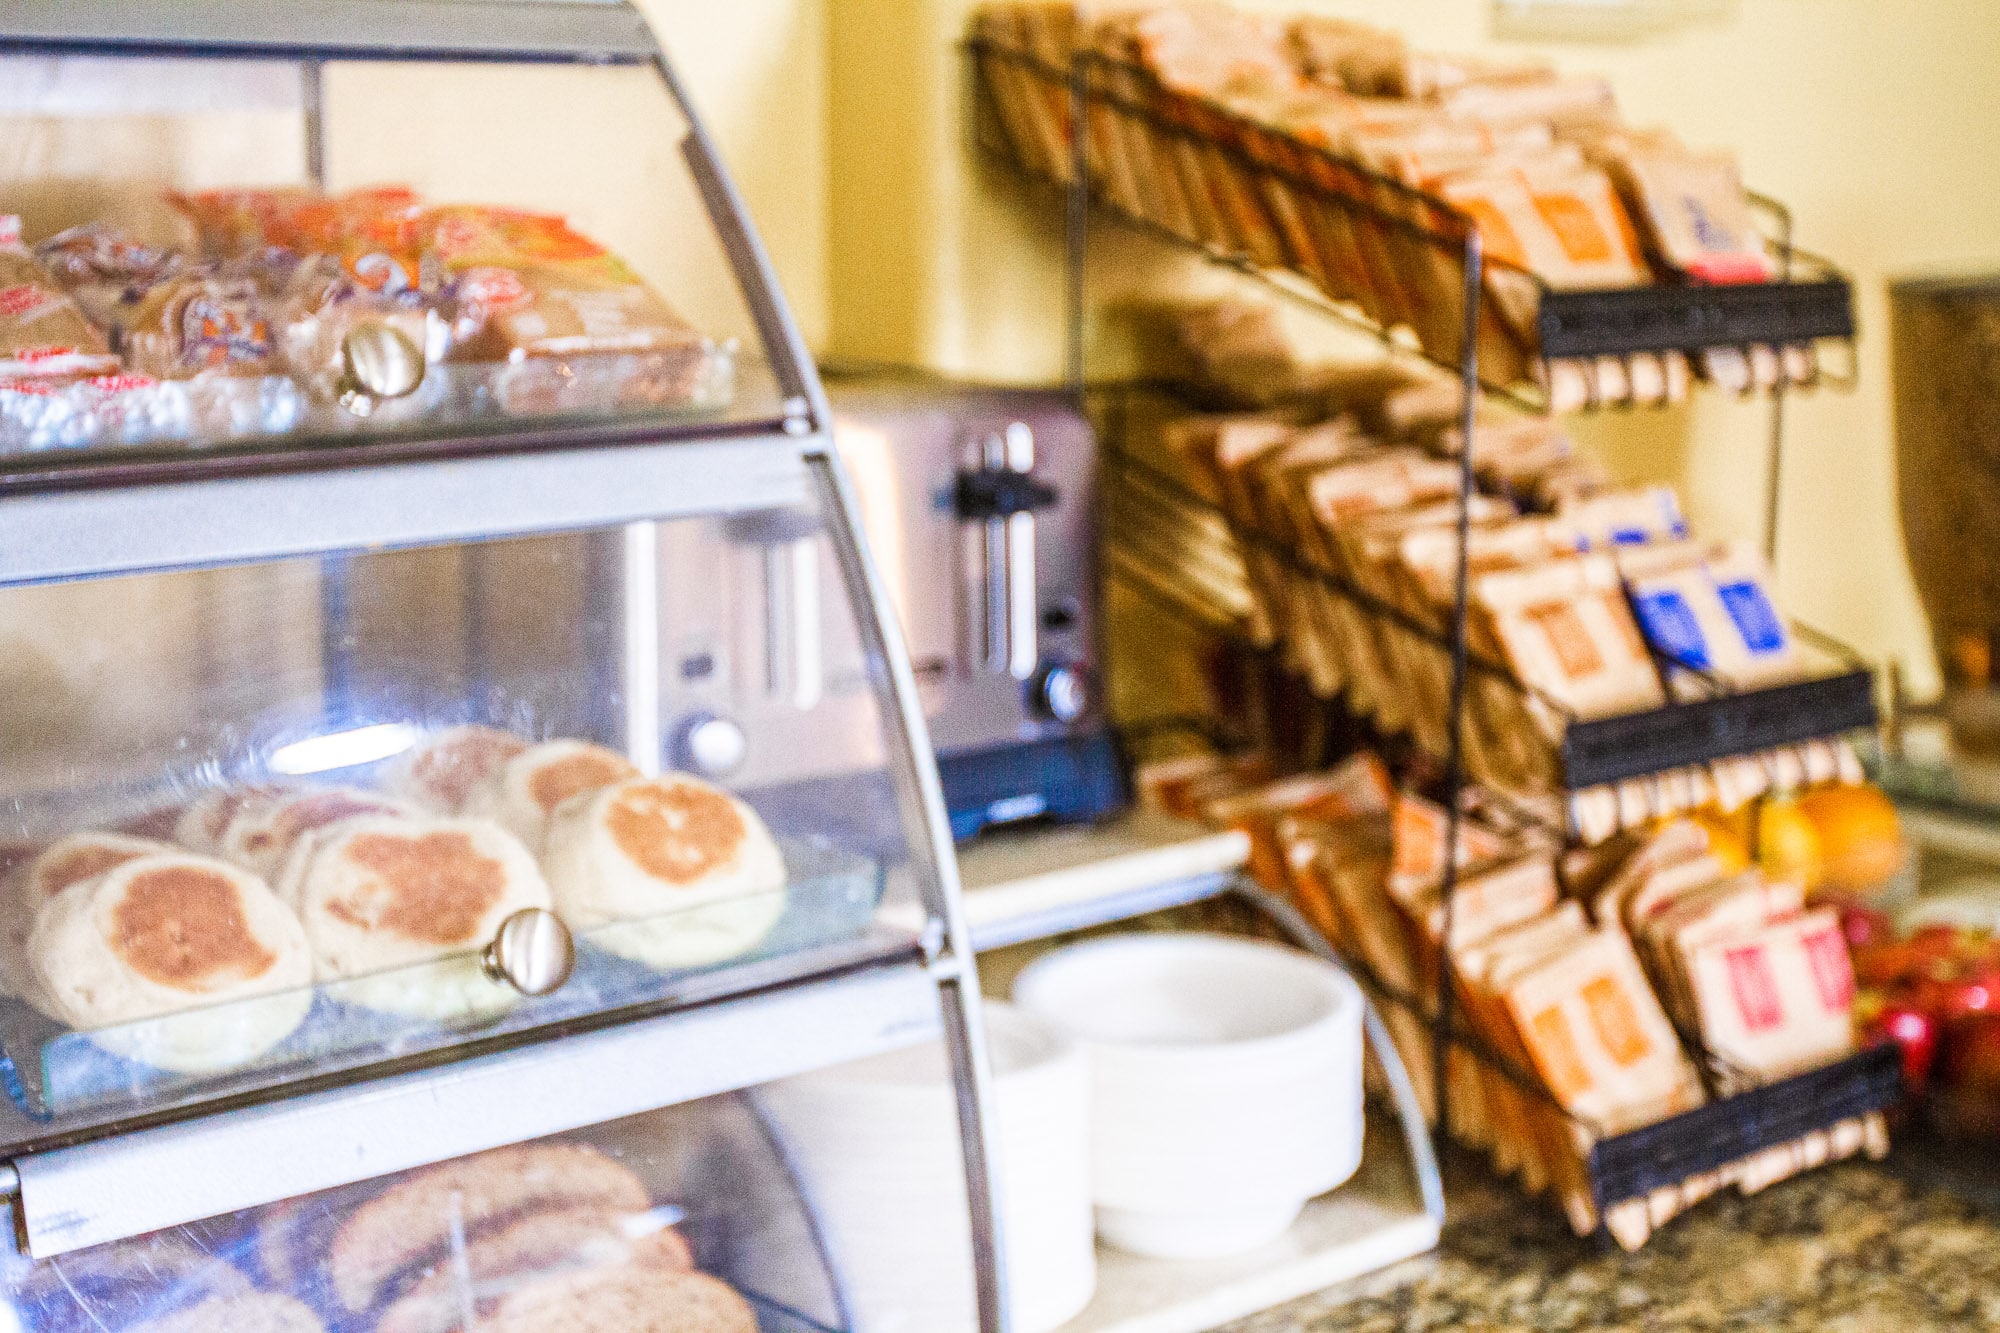 First Choice Inn's breakfast bar with a wide range of pastry, tea and coffee